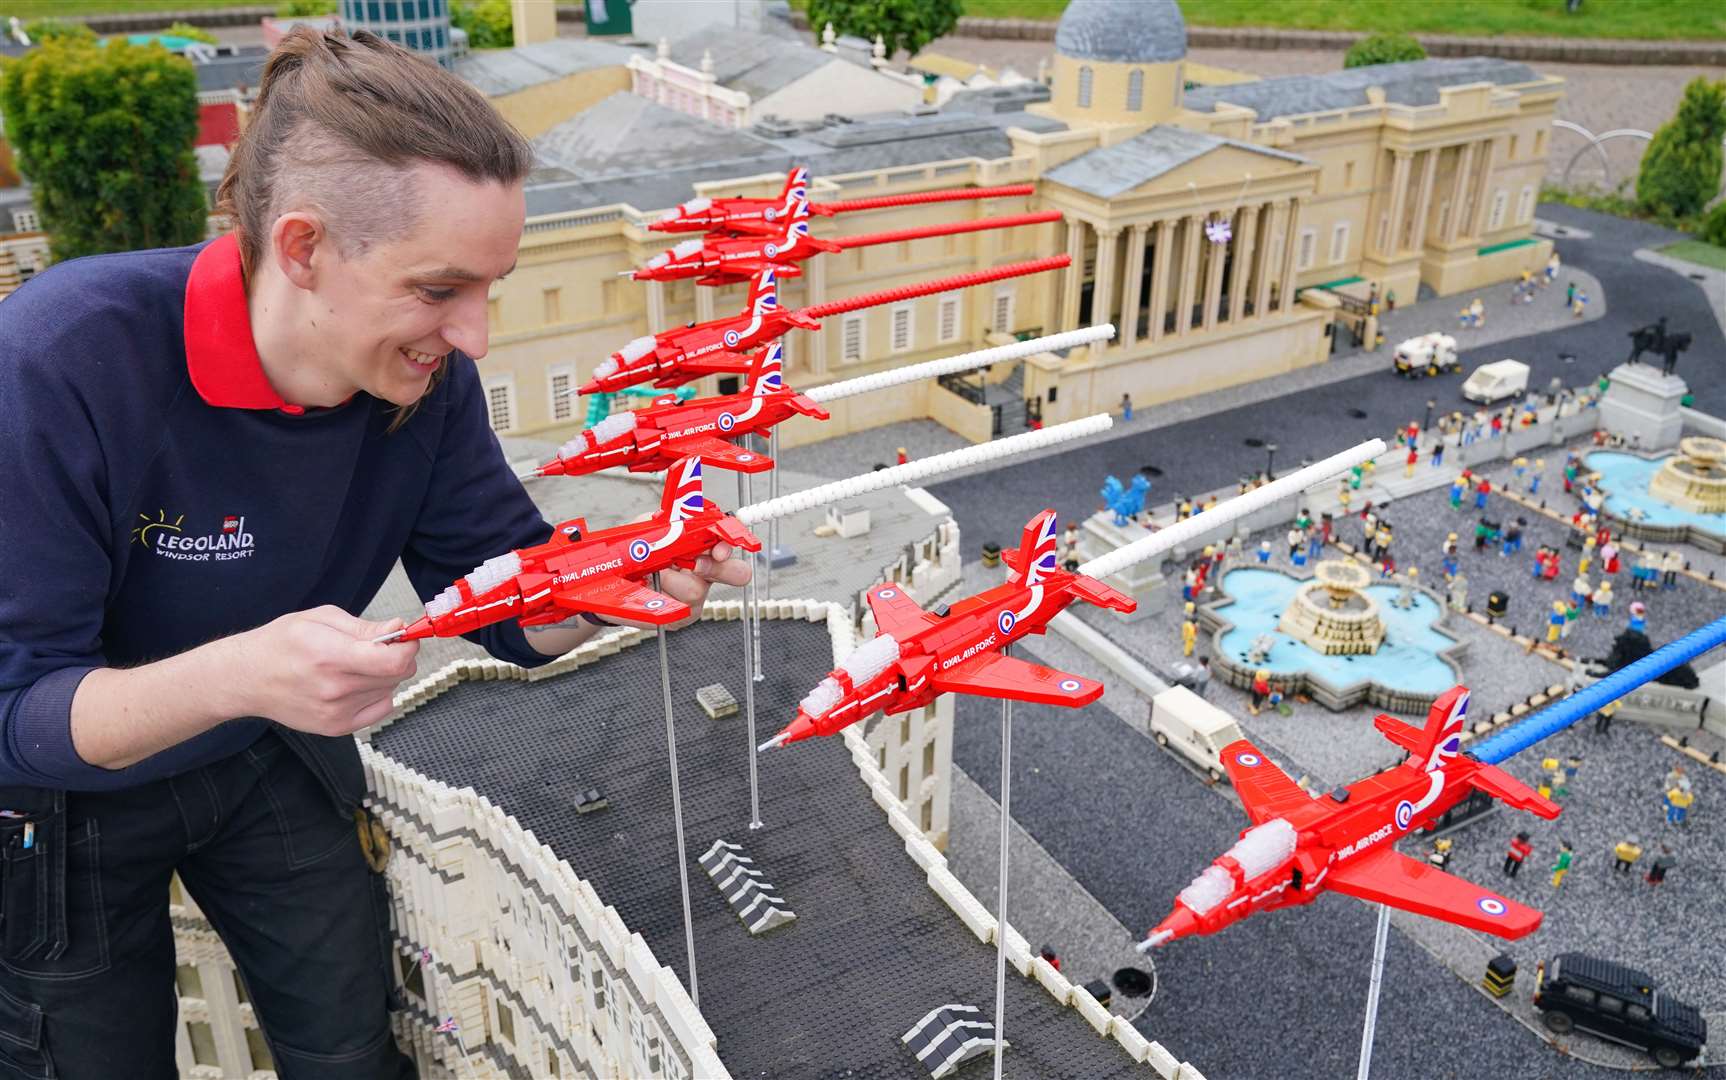 The Red Arrows scene took one model maker 33 hours to build (Jonathan Brady/PA)